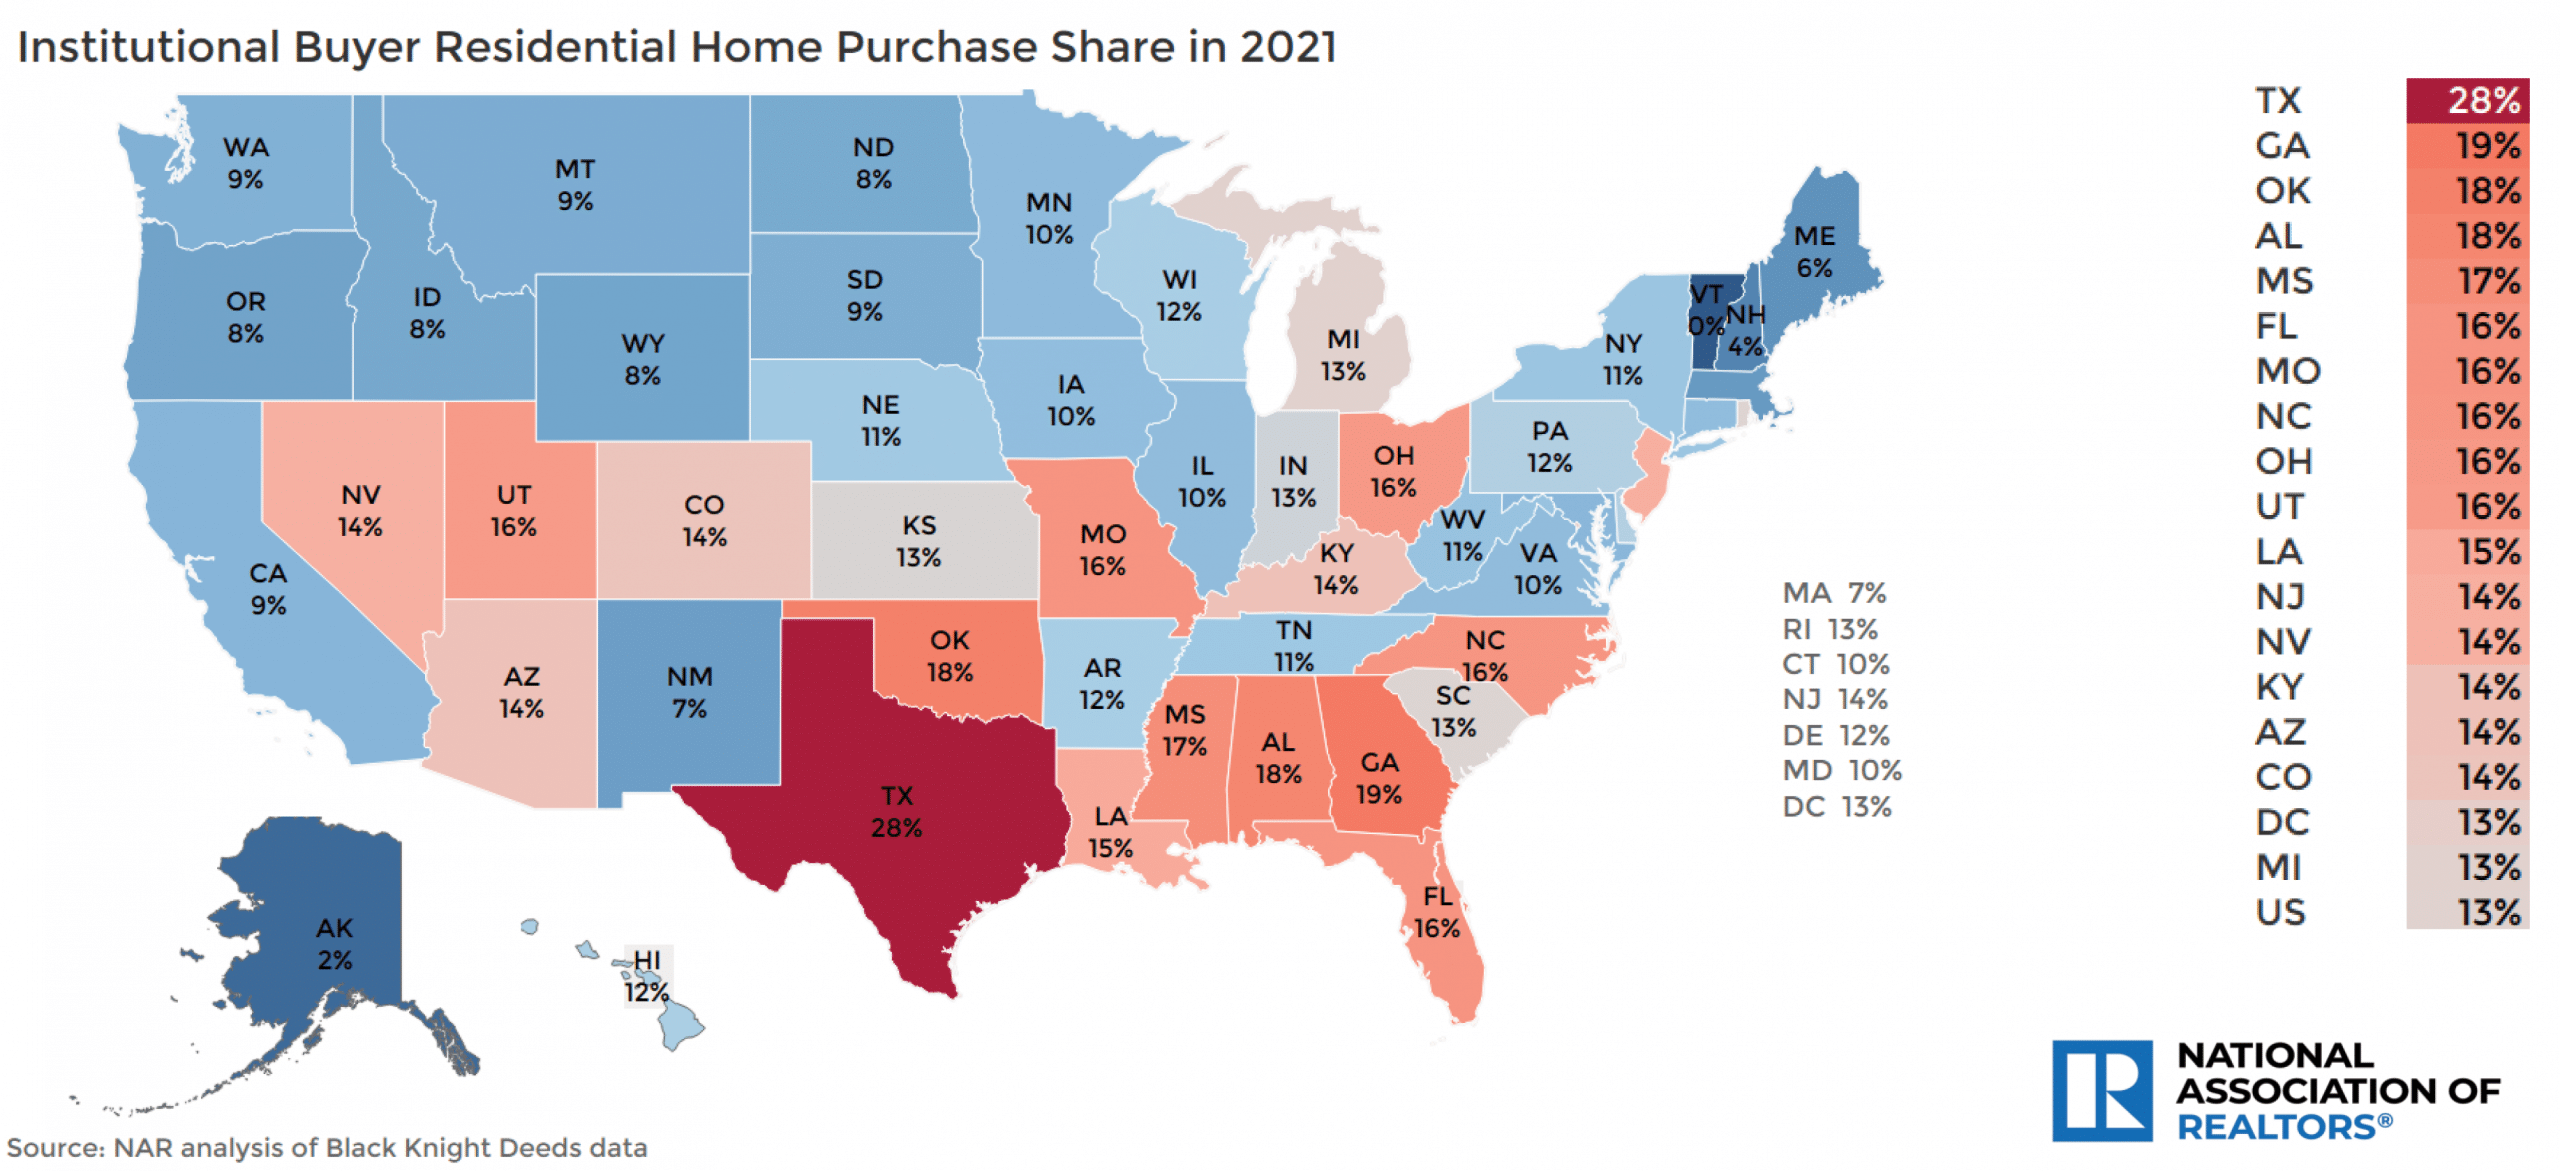 U.S. Map Chart of Instutional Buyer Residential Home Purchase Share Amounts in 2021